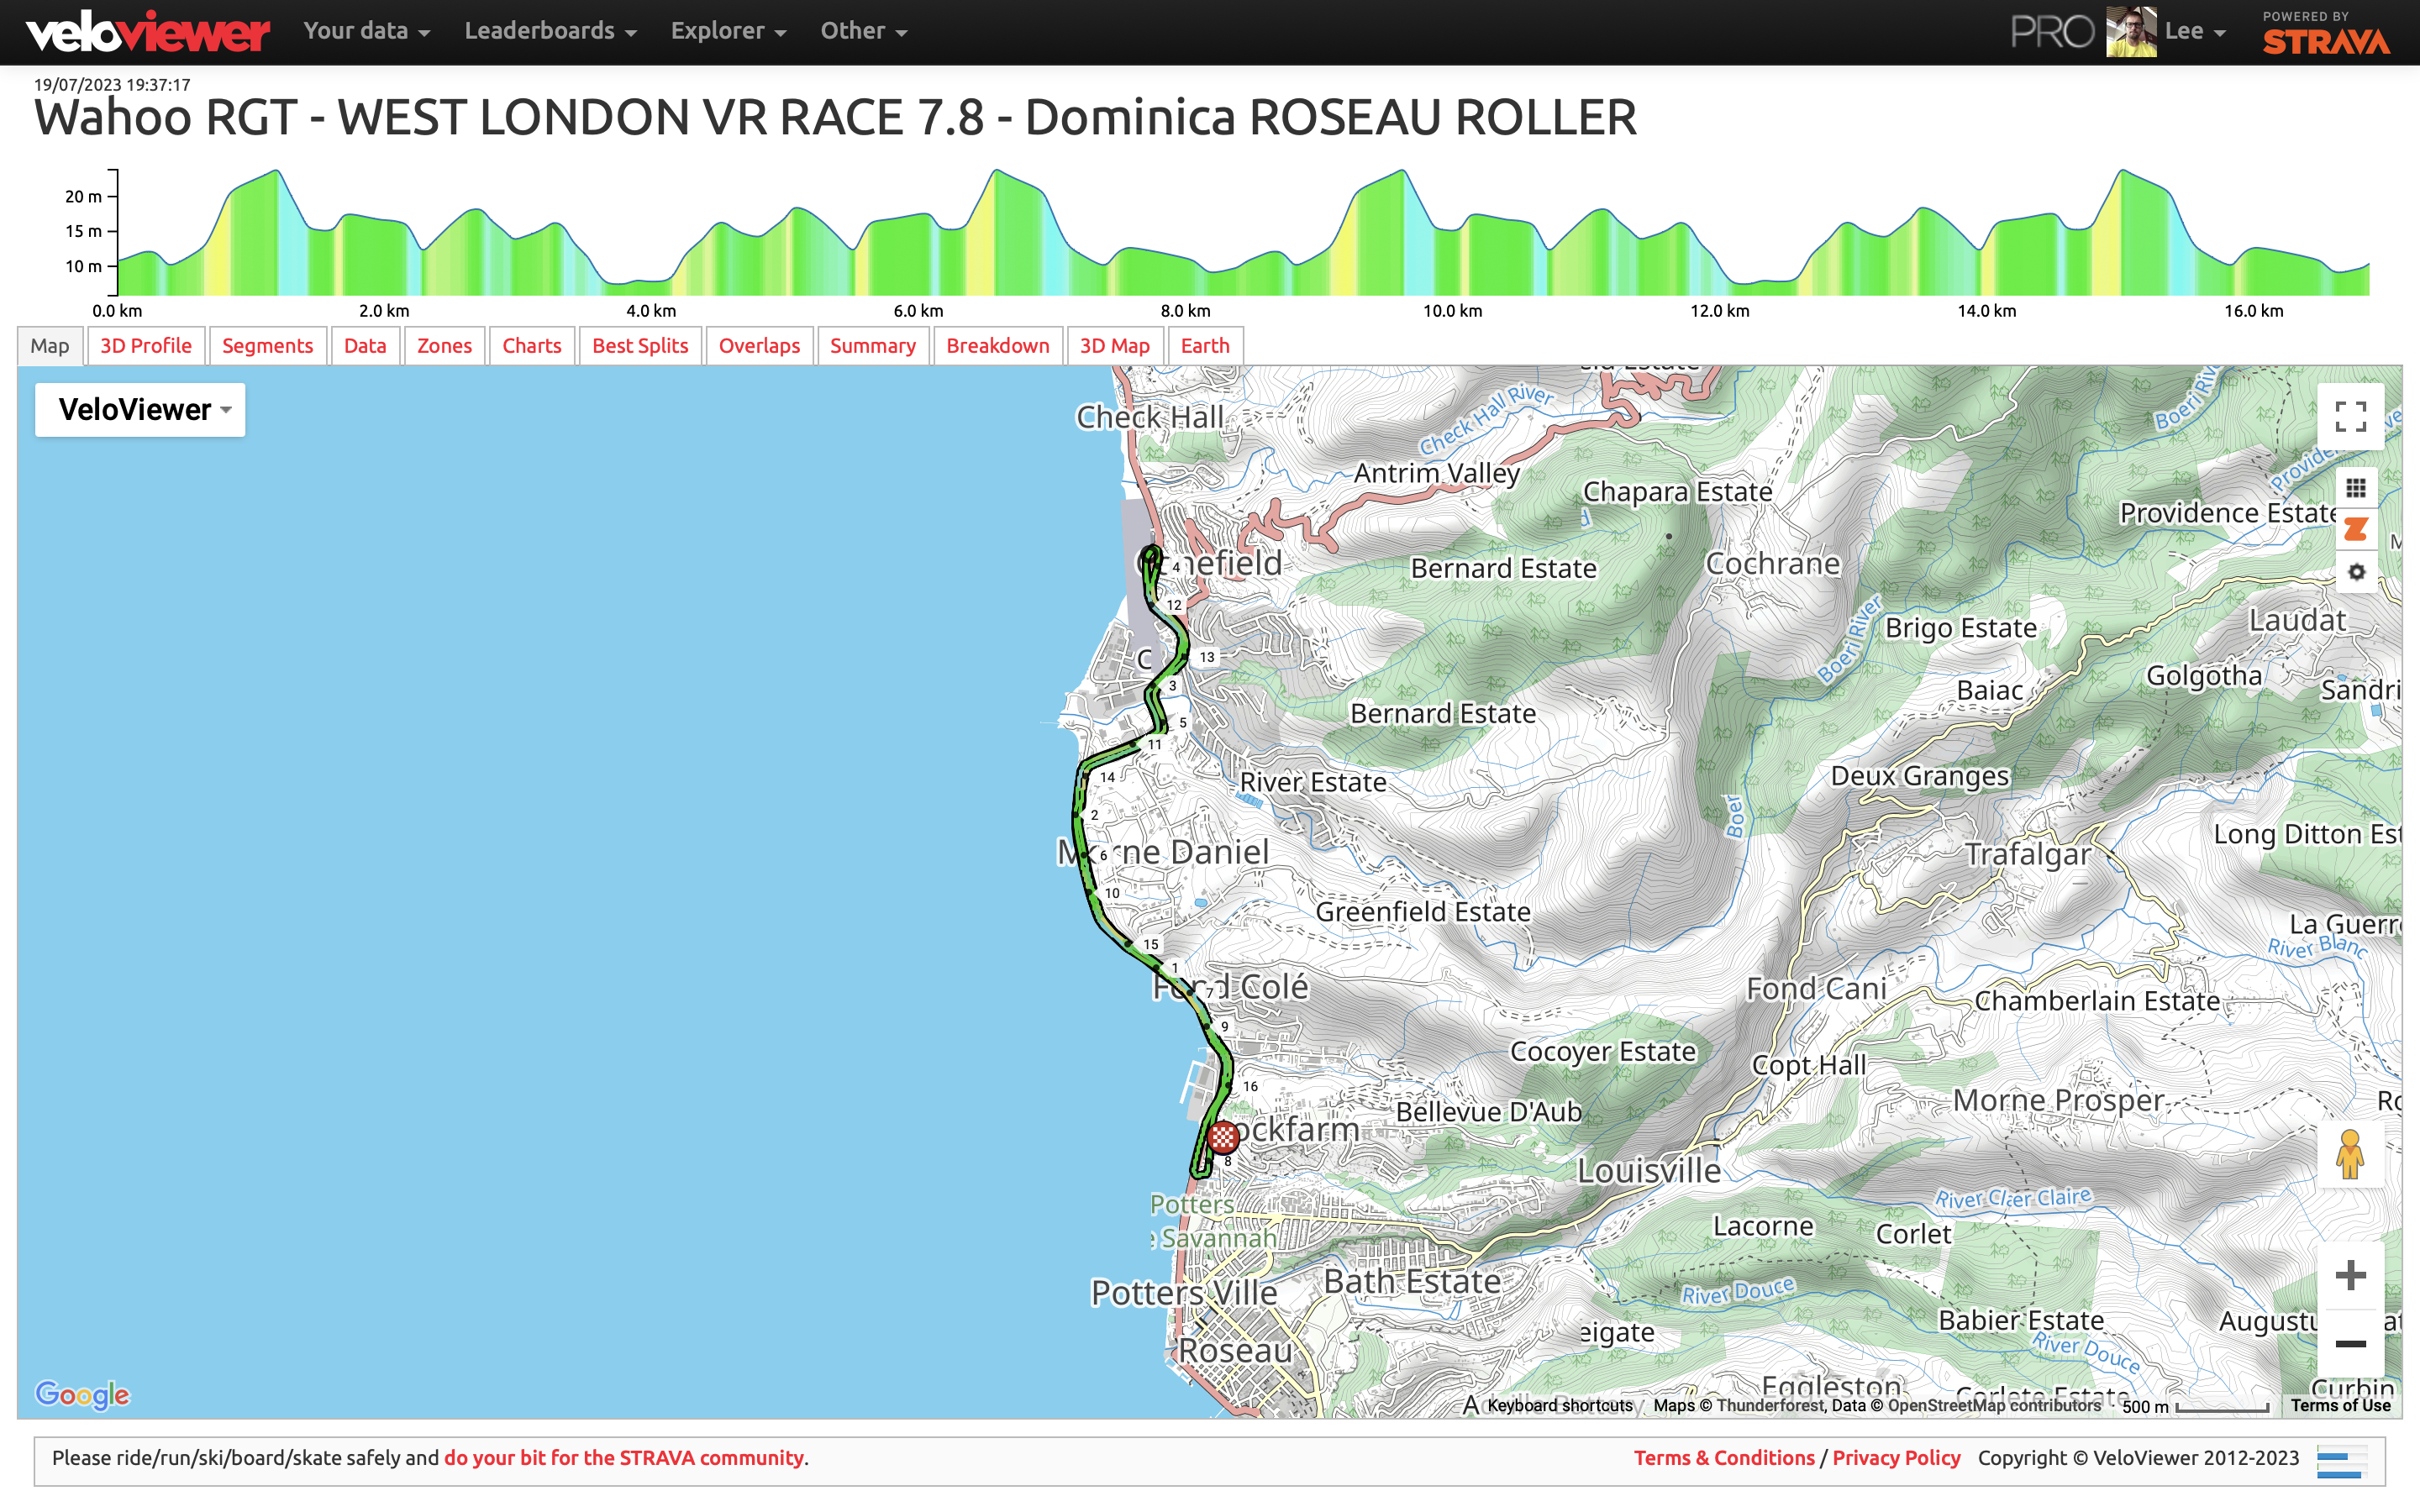 Map of RGT ride Dominicia Roseau Roller